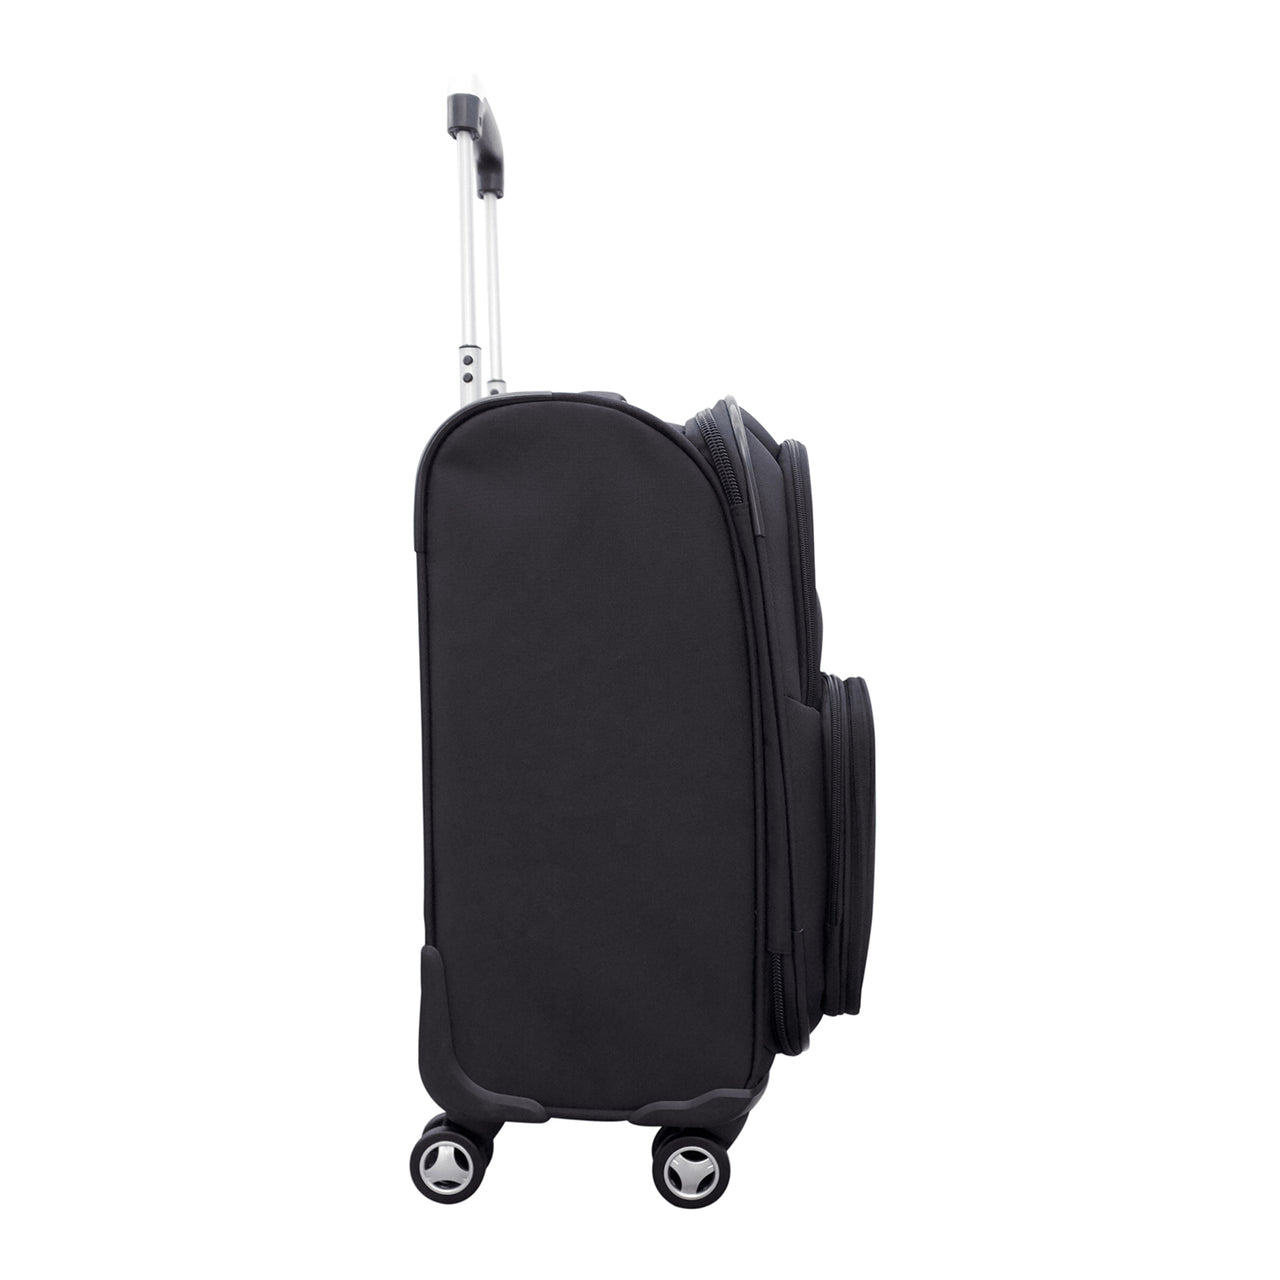 Appalachian State Mountaineers 21" Carry-on Spinner Luggage